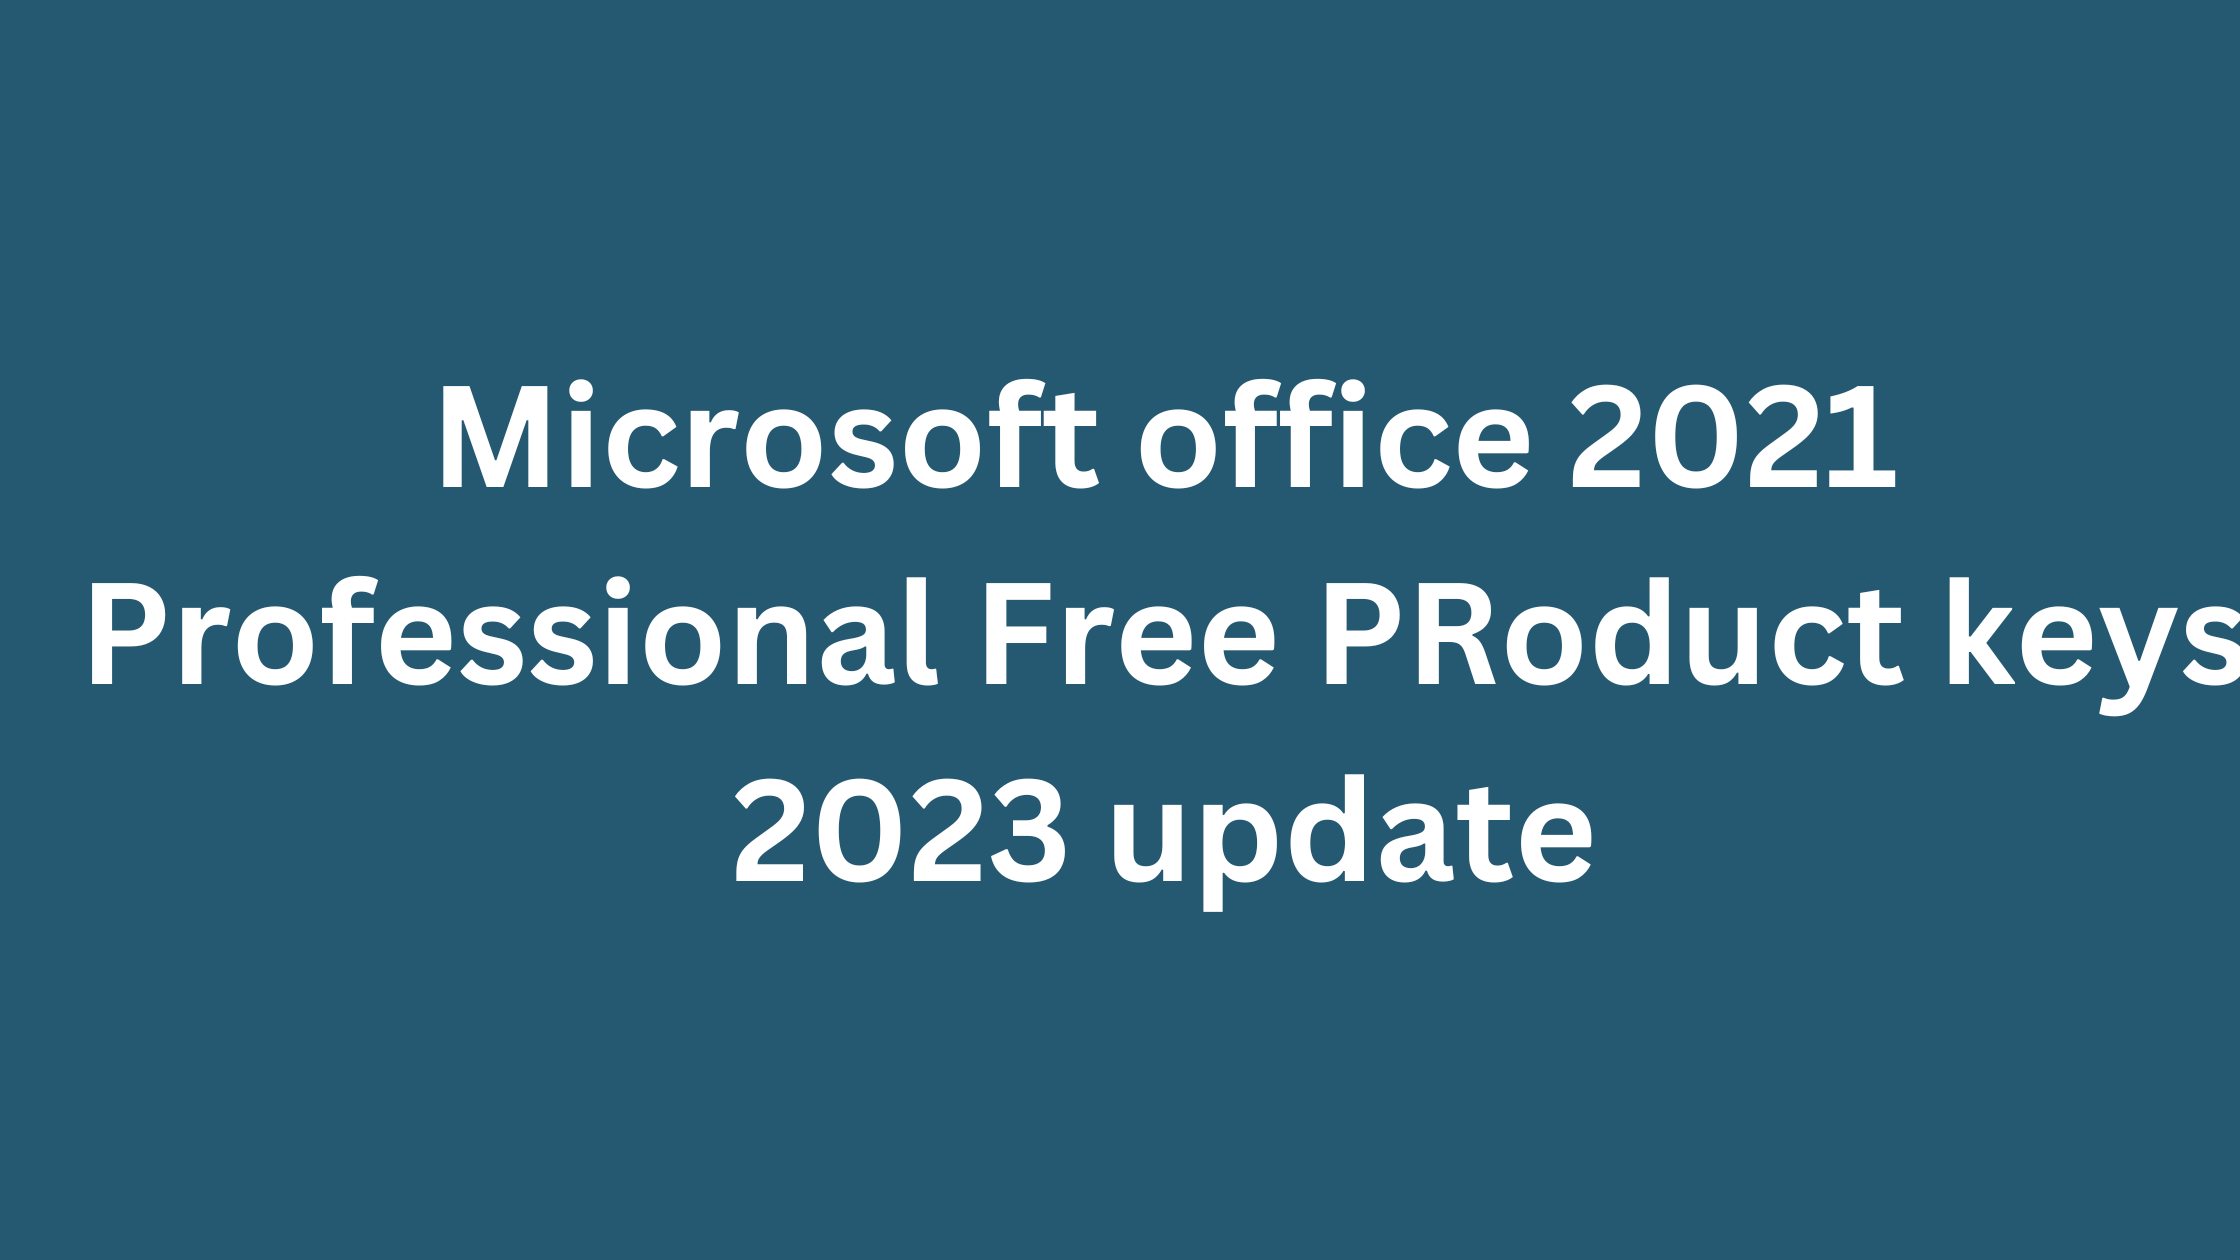 Microsoft Office 2021 Professional product keys for free